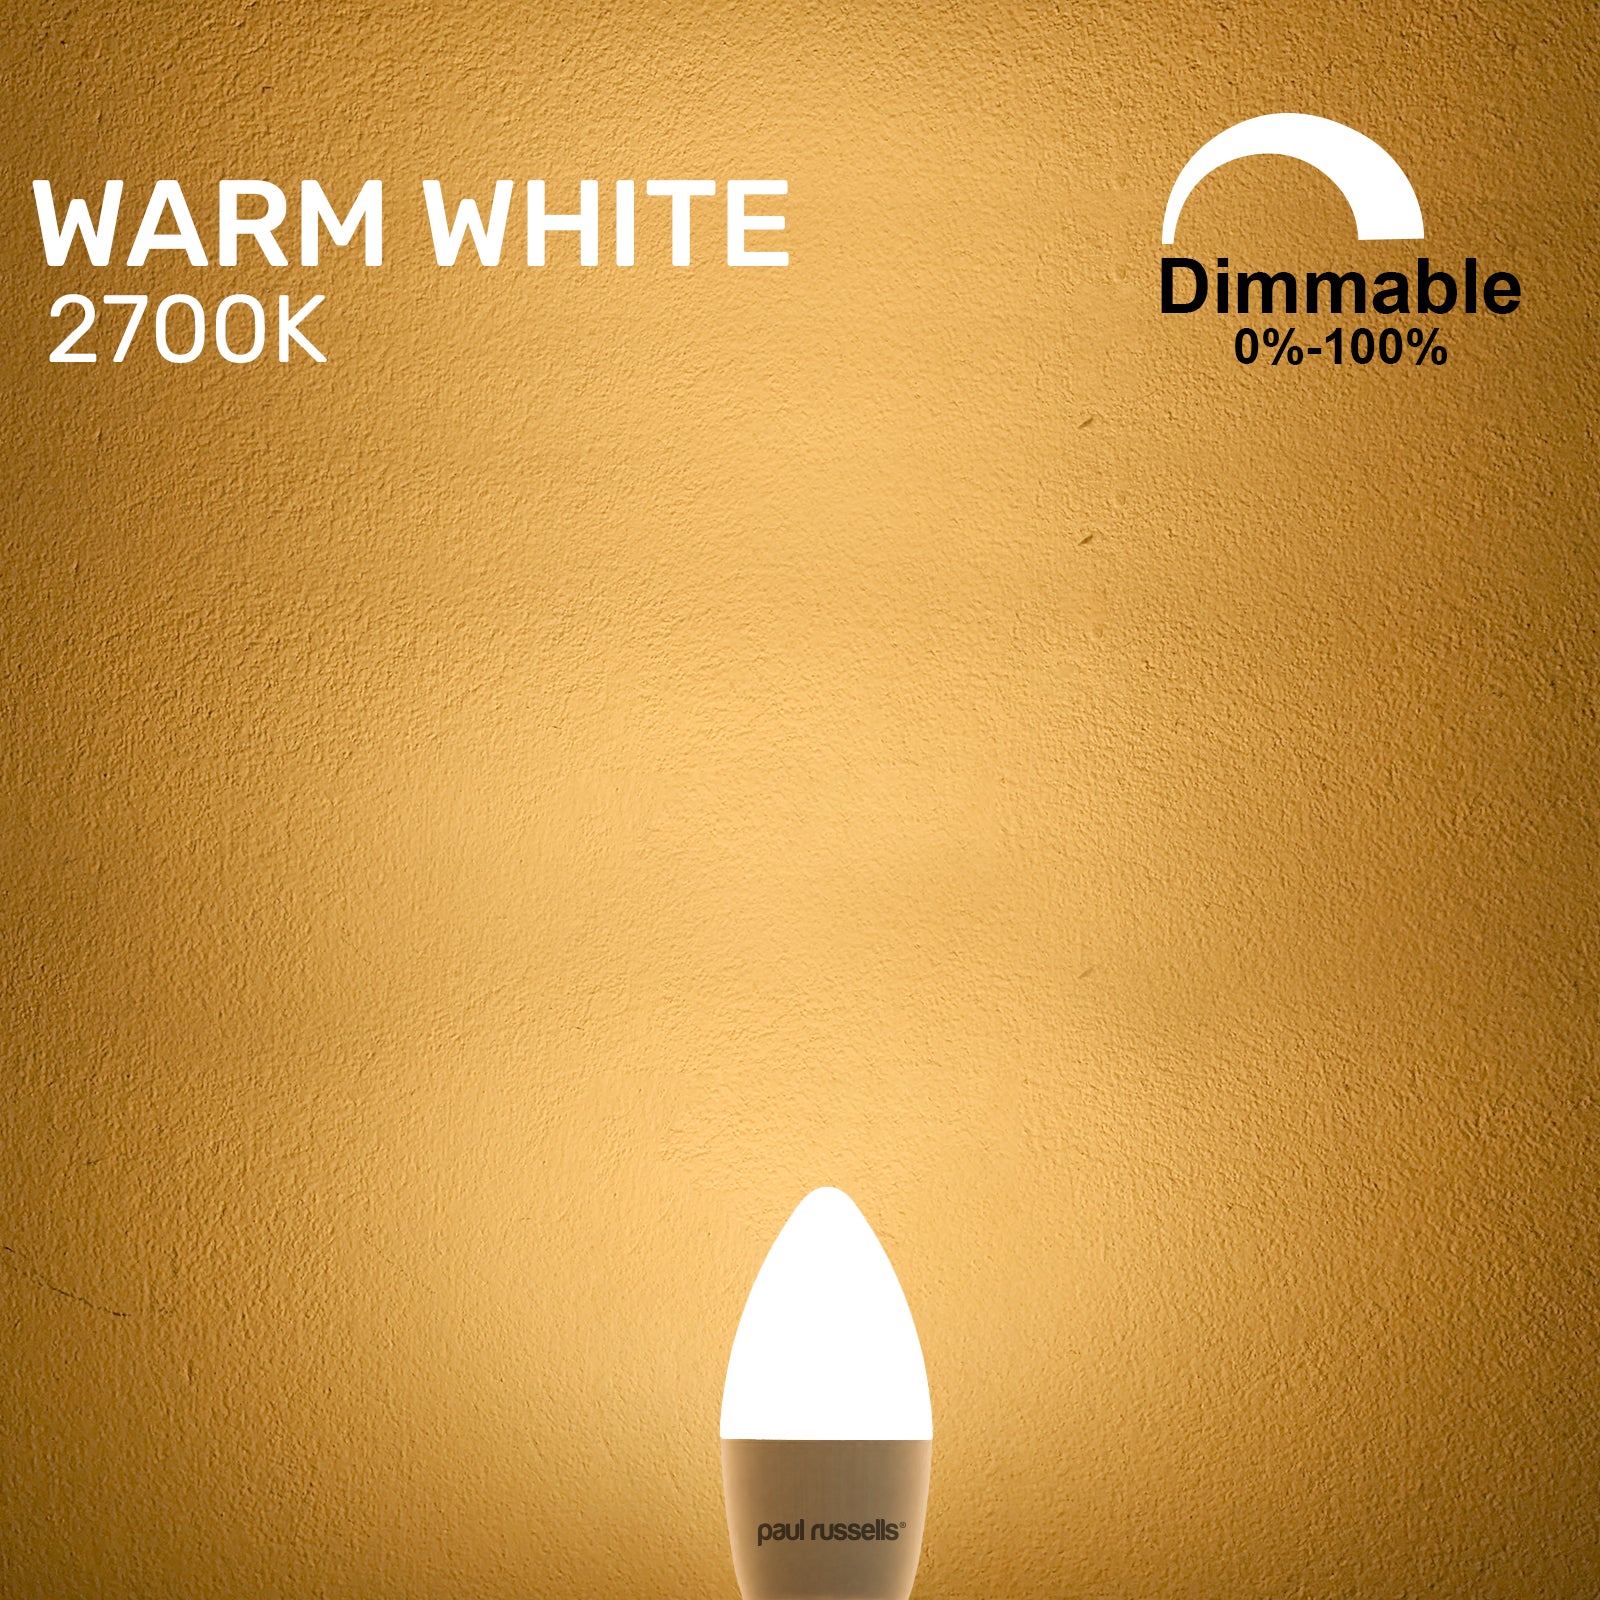 LED Dimmable Candle 5.5W (40w), SBC/B15, 470 Lumens, Warm White(2700K), 240V